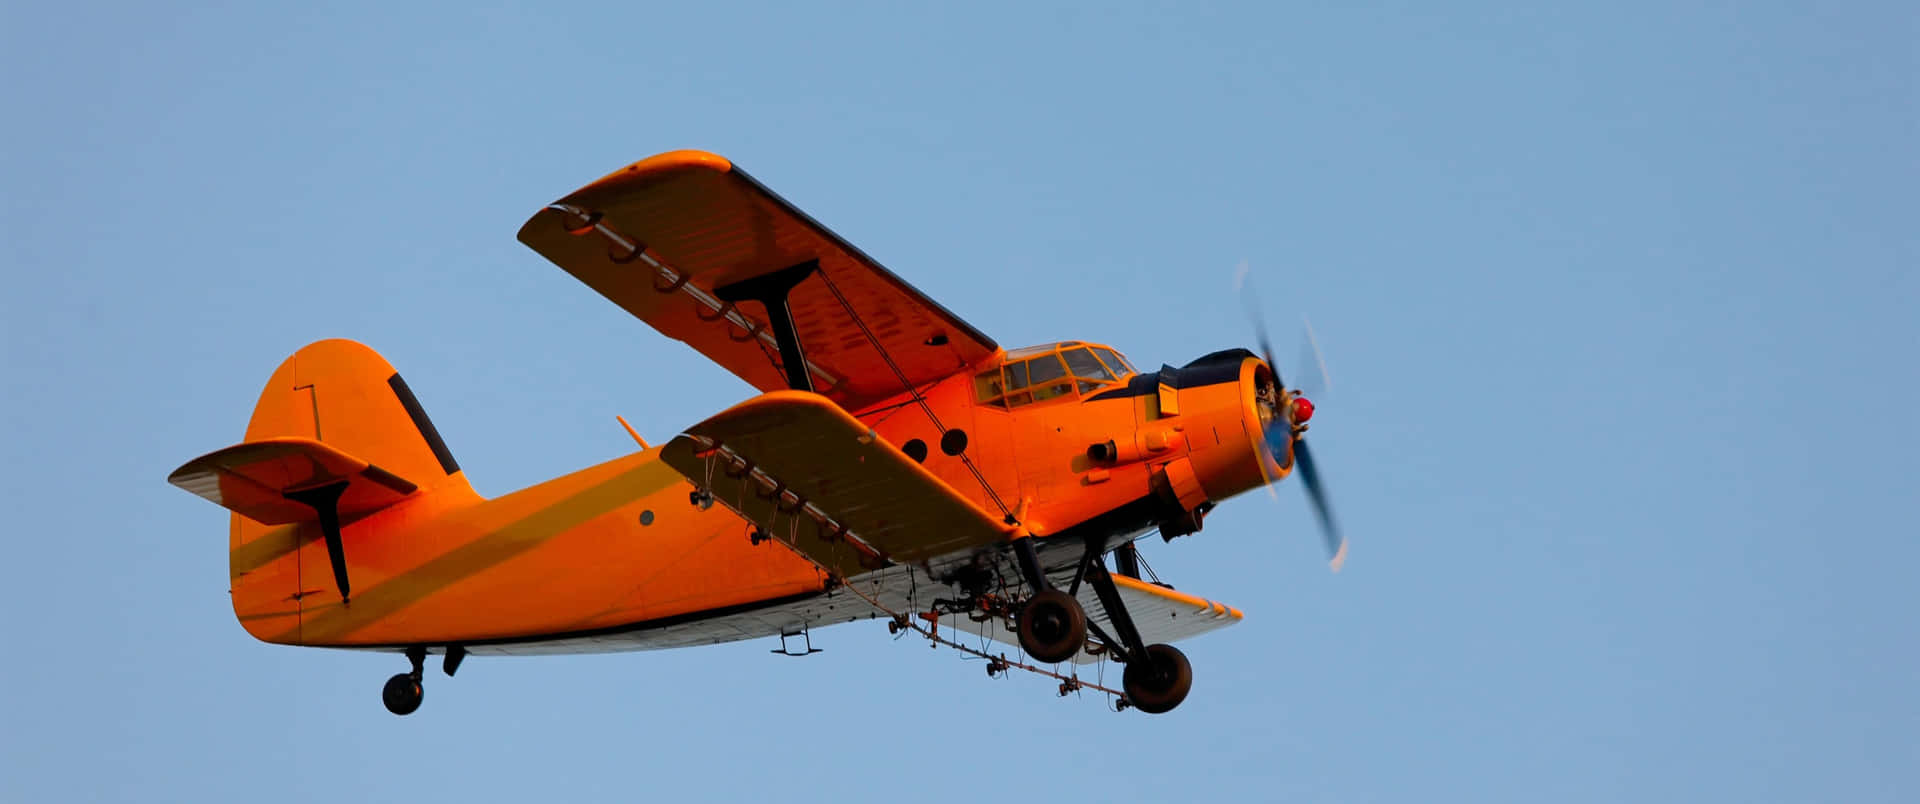 Enjoy The Rush Of Open Skies With Small Planes